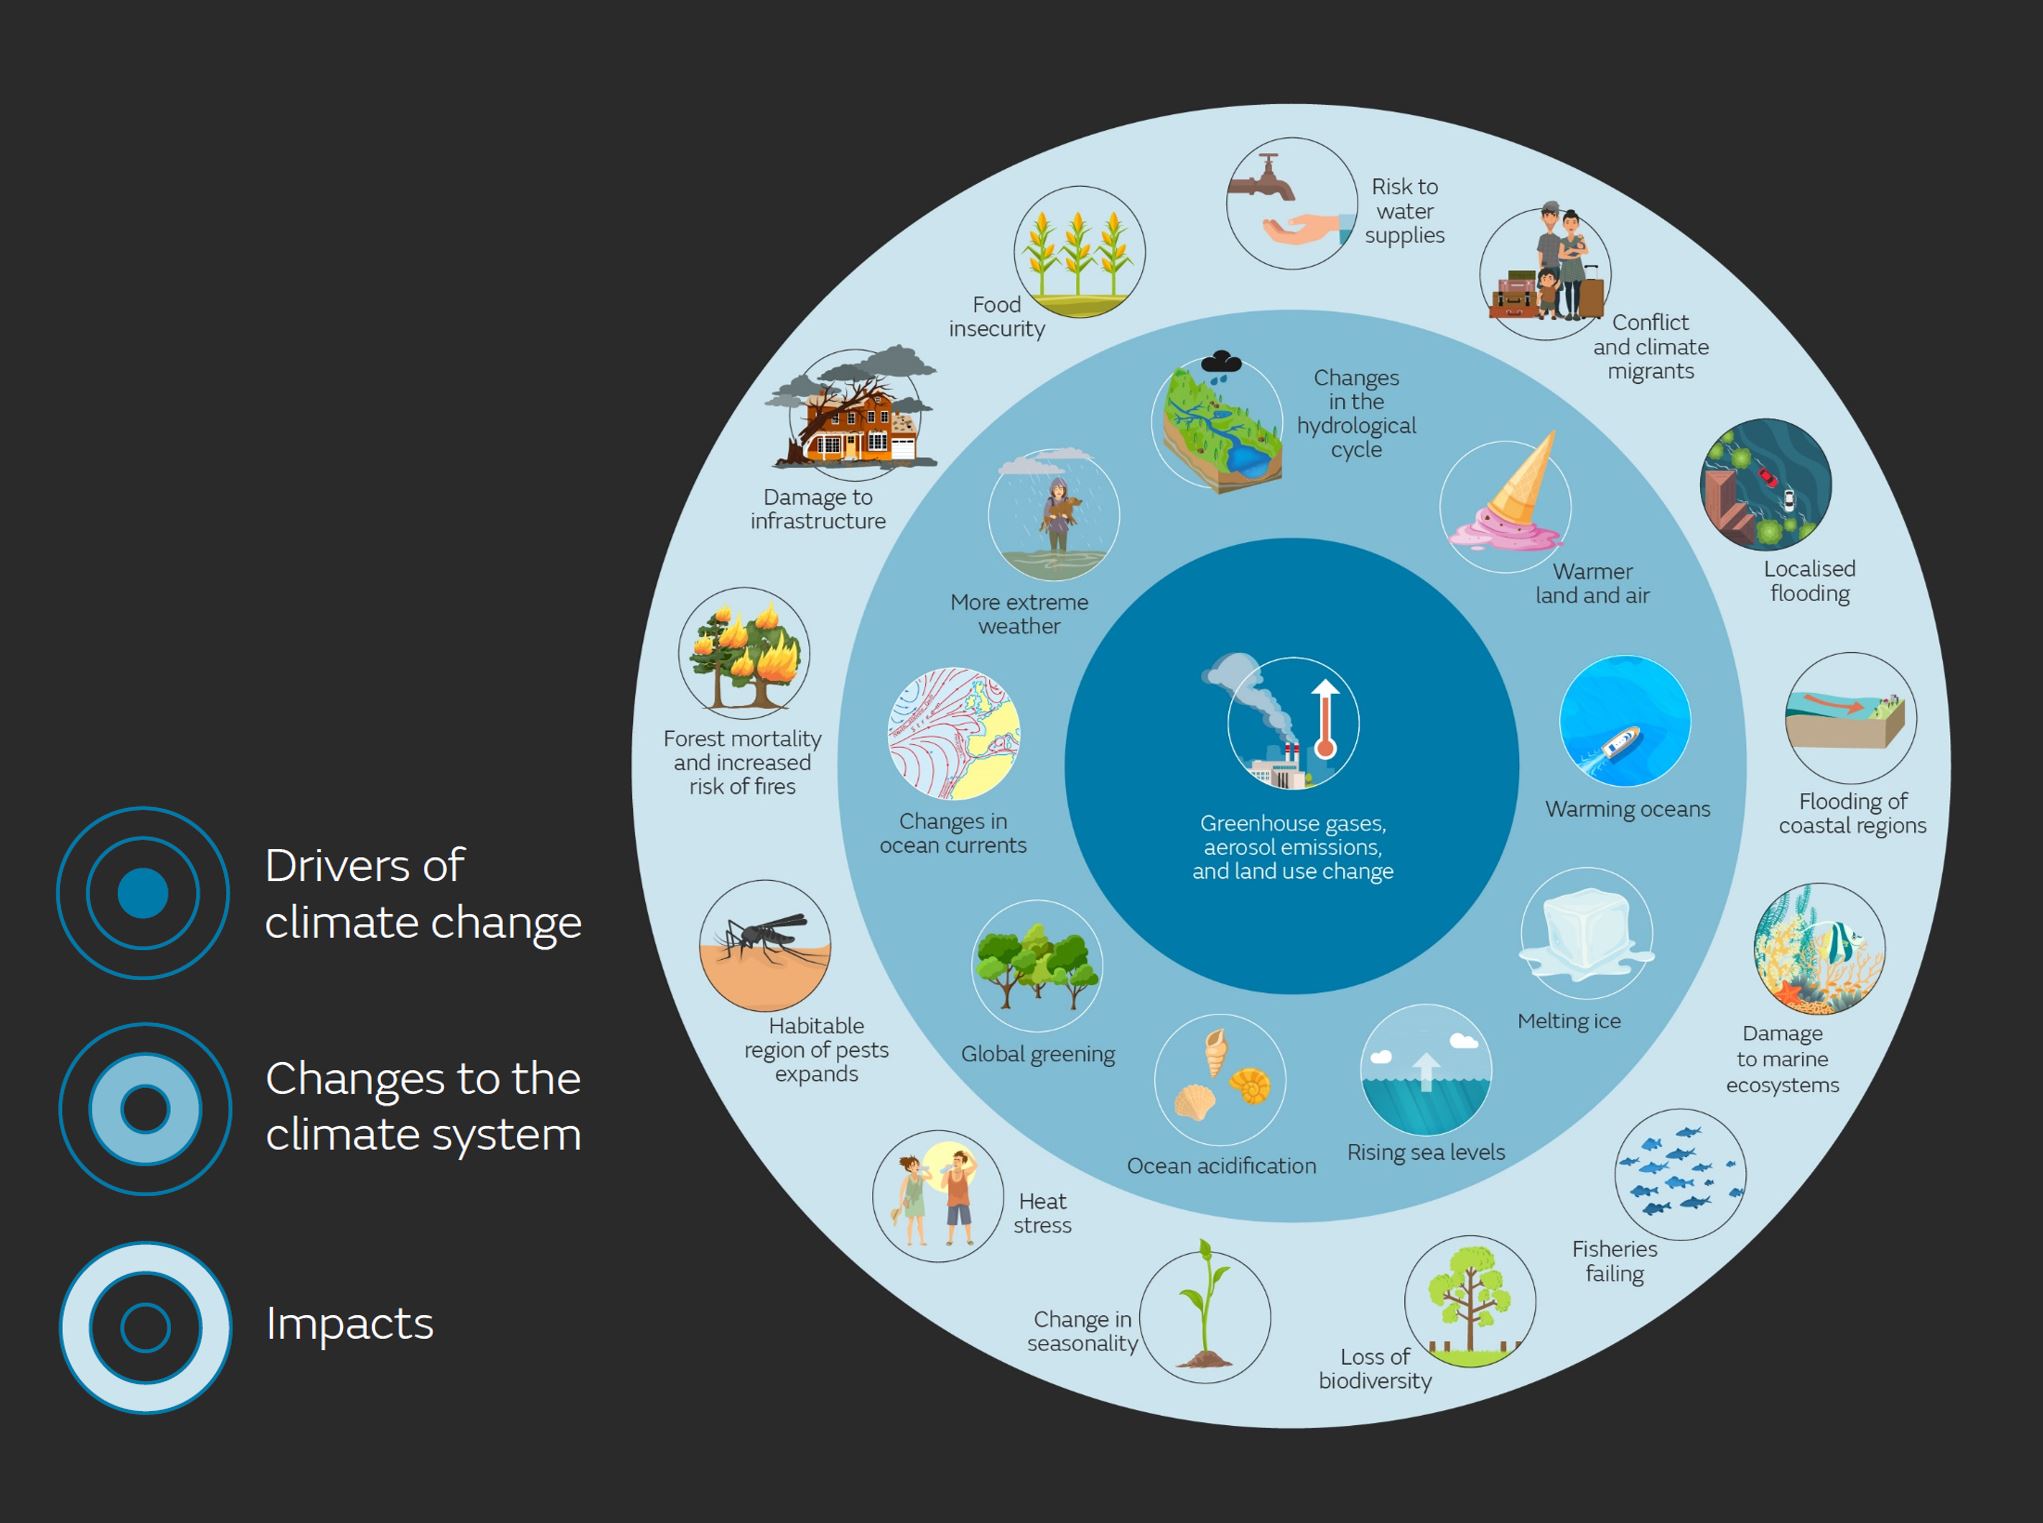 Image showing some of the drivers of climate change and its impacts